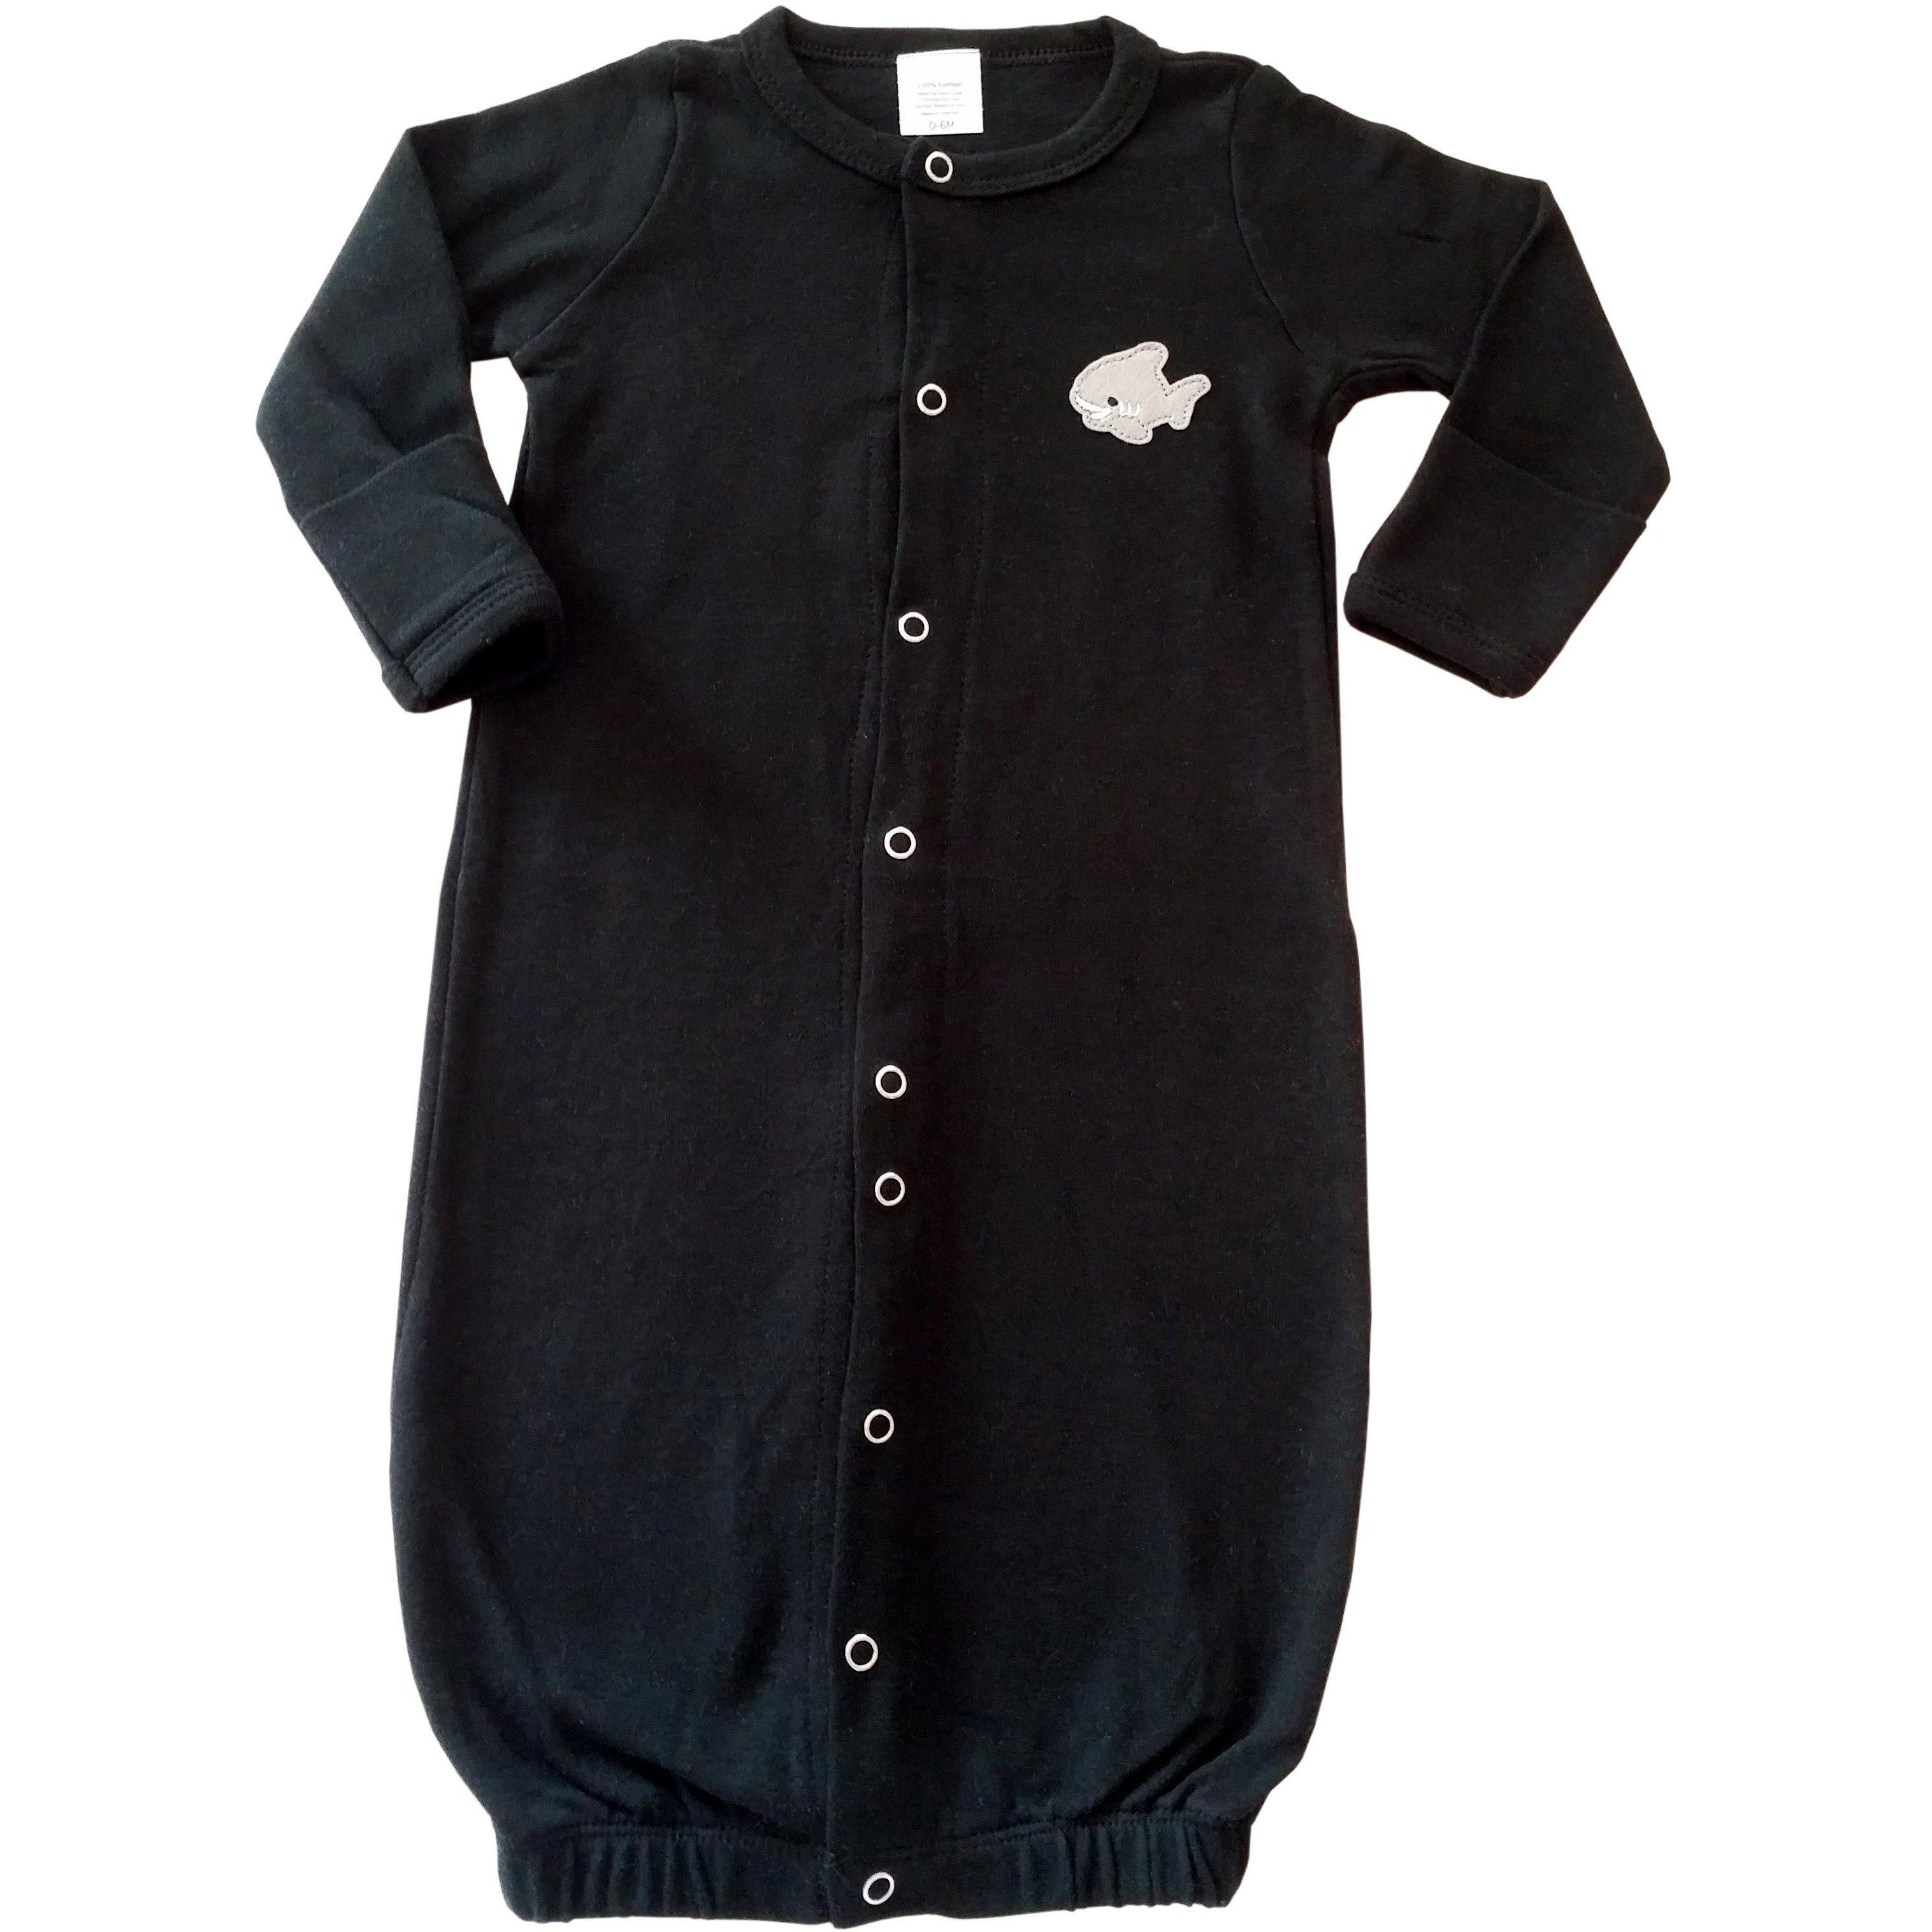 Convertible Black Night Gown Baby Clothes For Boys & Girls - Snug Bub USA